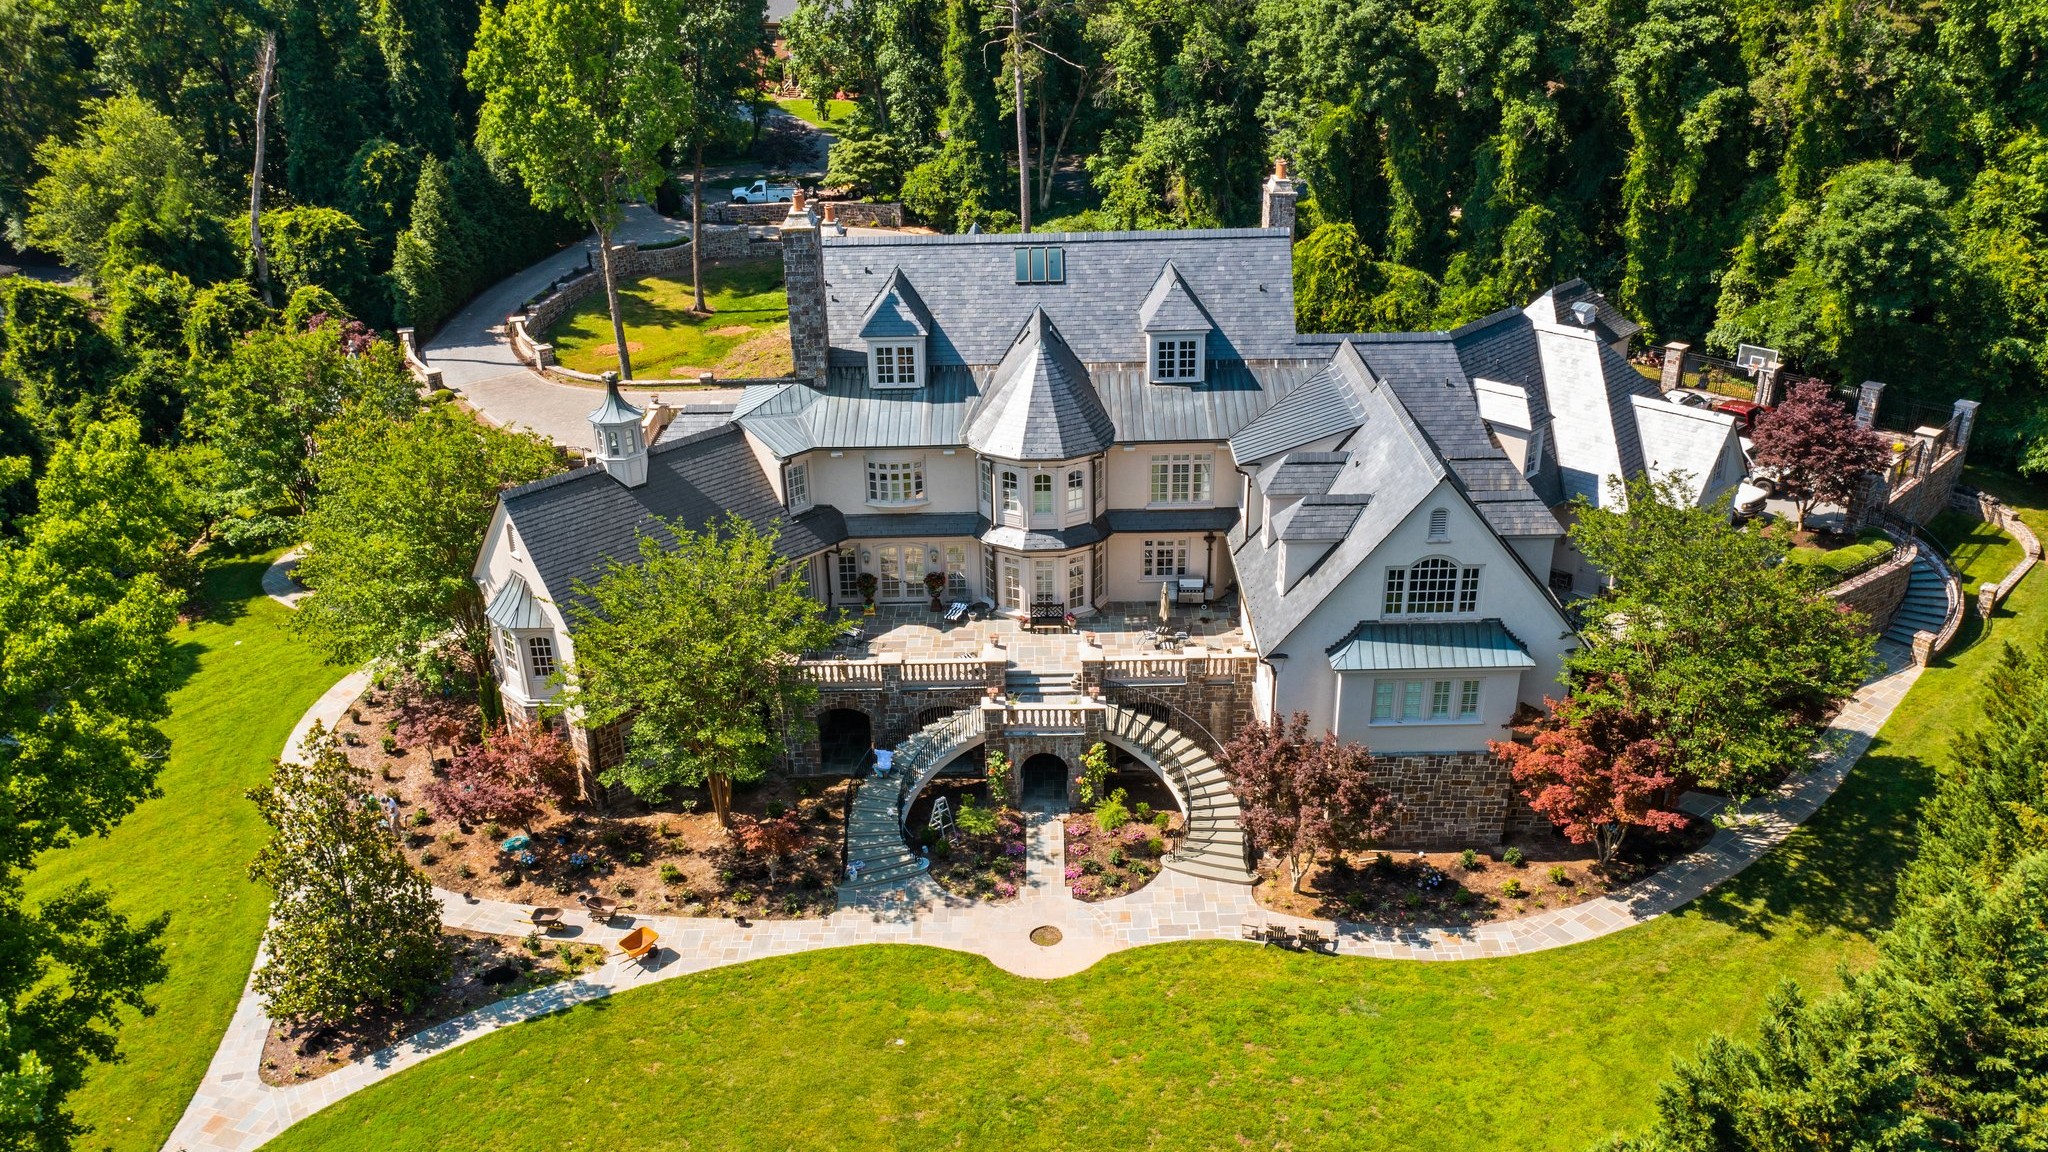 Triangle luxury home sales aren’t slowing